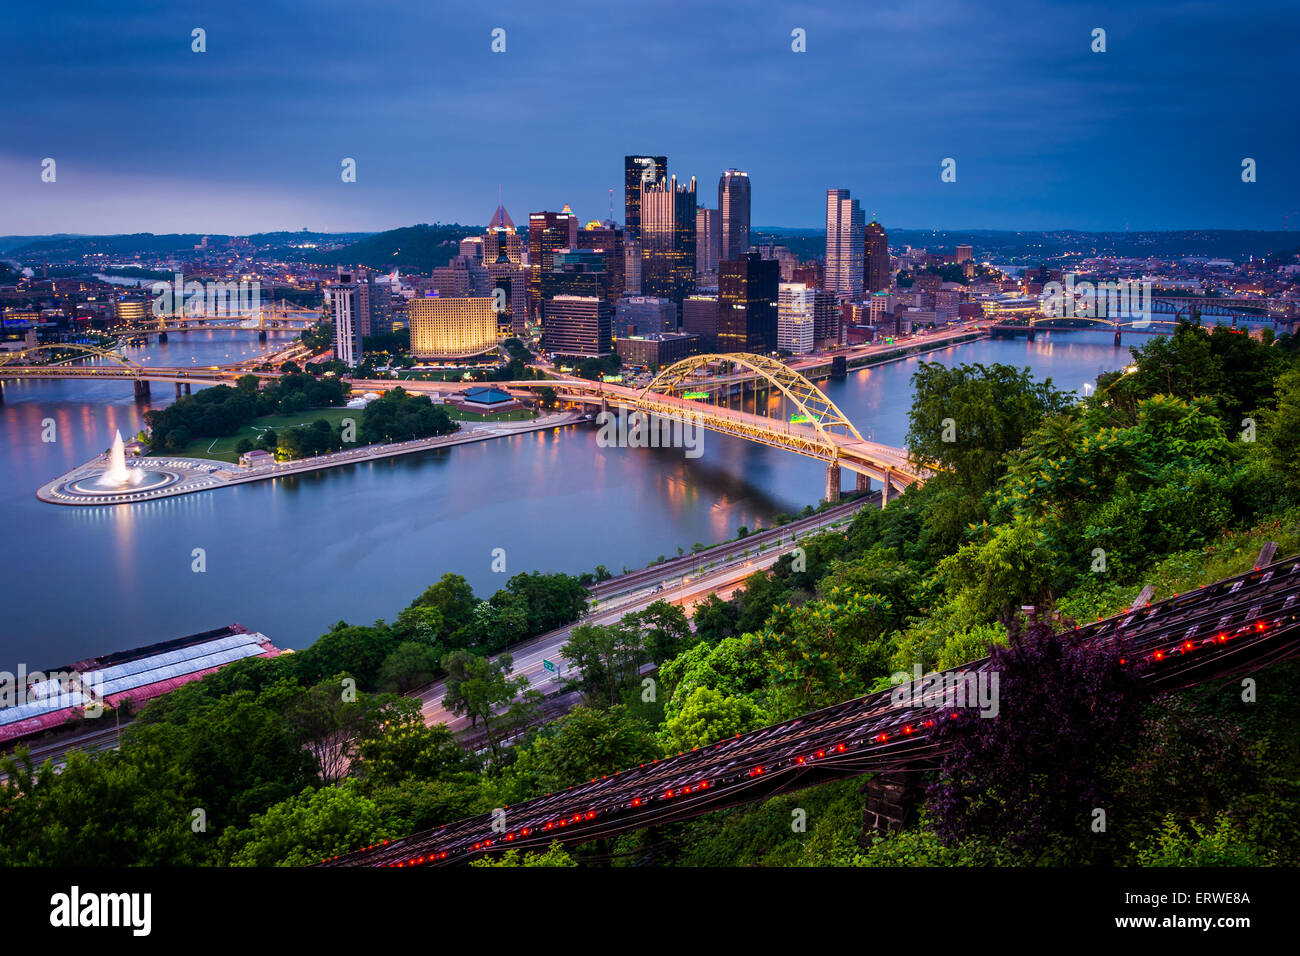 Evening view of Pittsburgh from the top of the Duquesne Incline in Mount Washington, Pittsburgh, Pennsylvania. Stock Photo